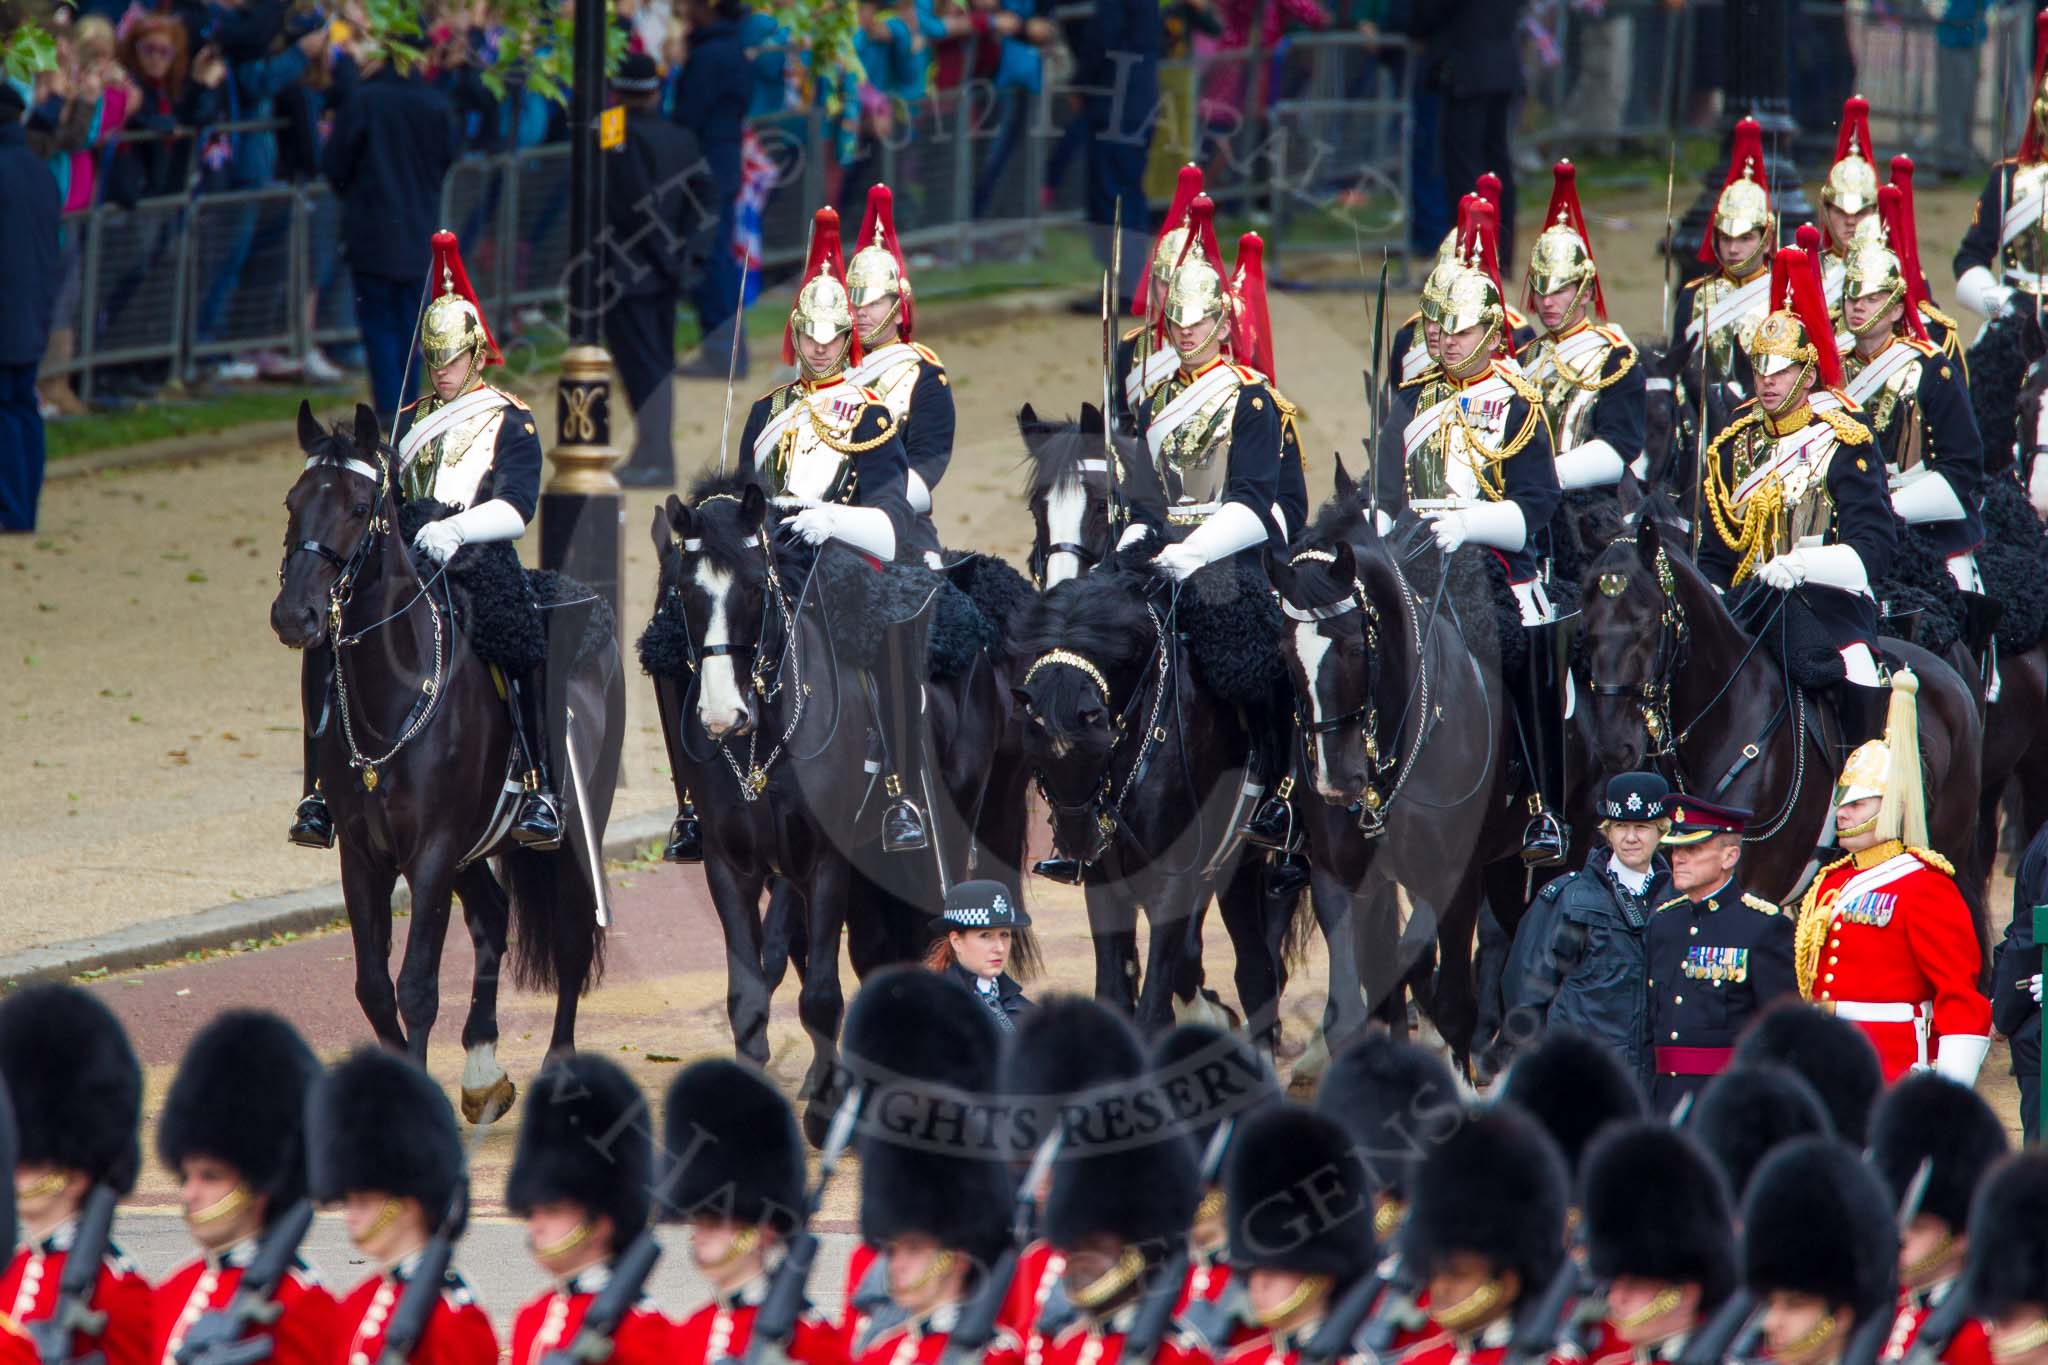 The Colonel's Review 2012: The first divisions of the Sovereign’s Escort, the Blues and Royals, arriving at Horse Guards Parade..
Horse Guards Parade, Westminster,
London SW1,

United Kingdom,
on 09 June 2012 at 10:56, image #138